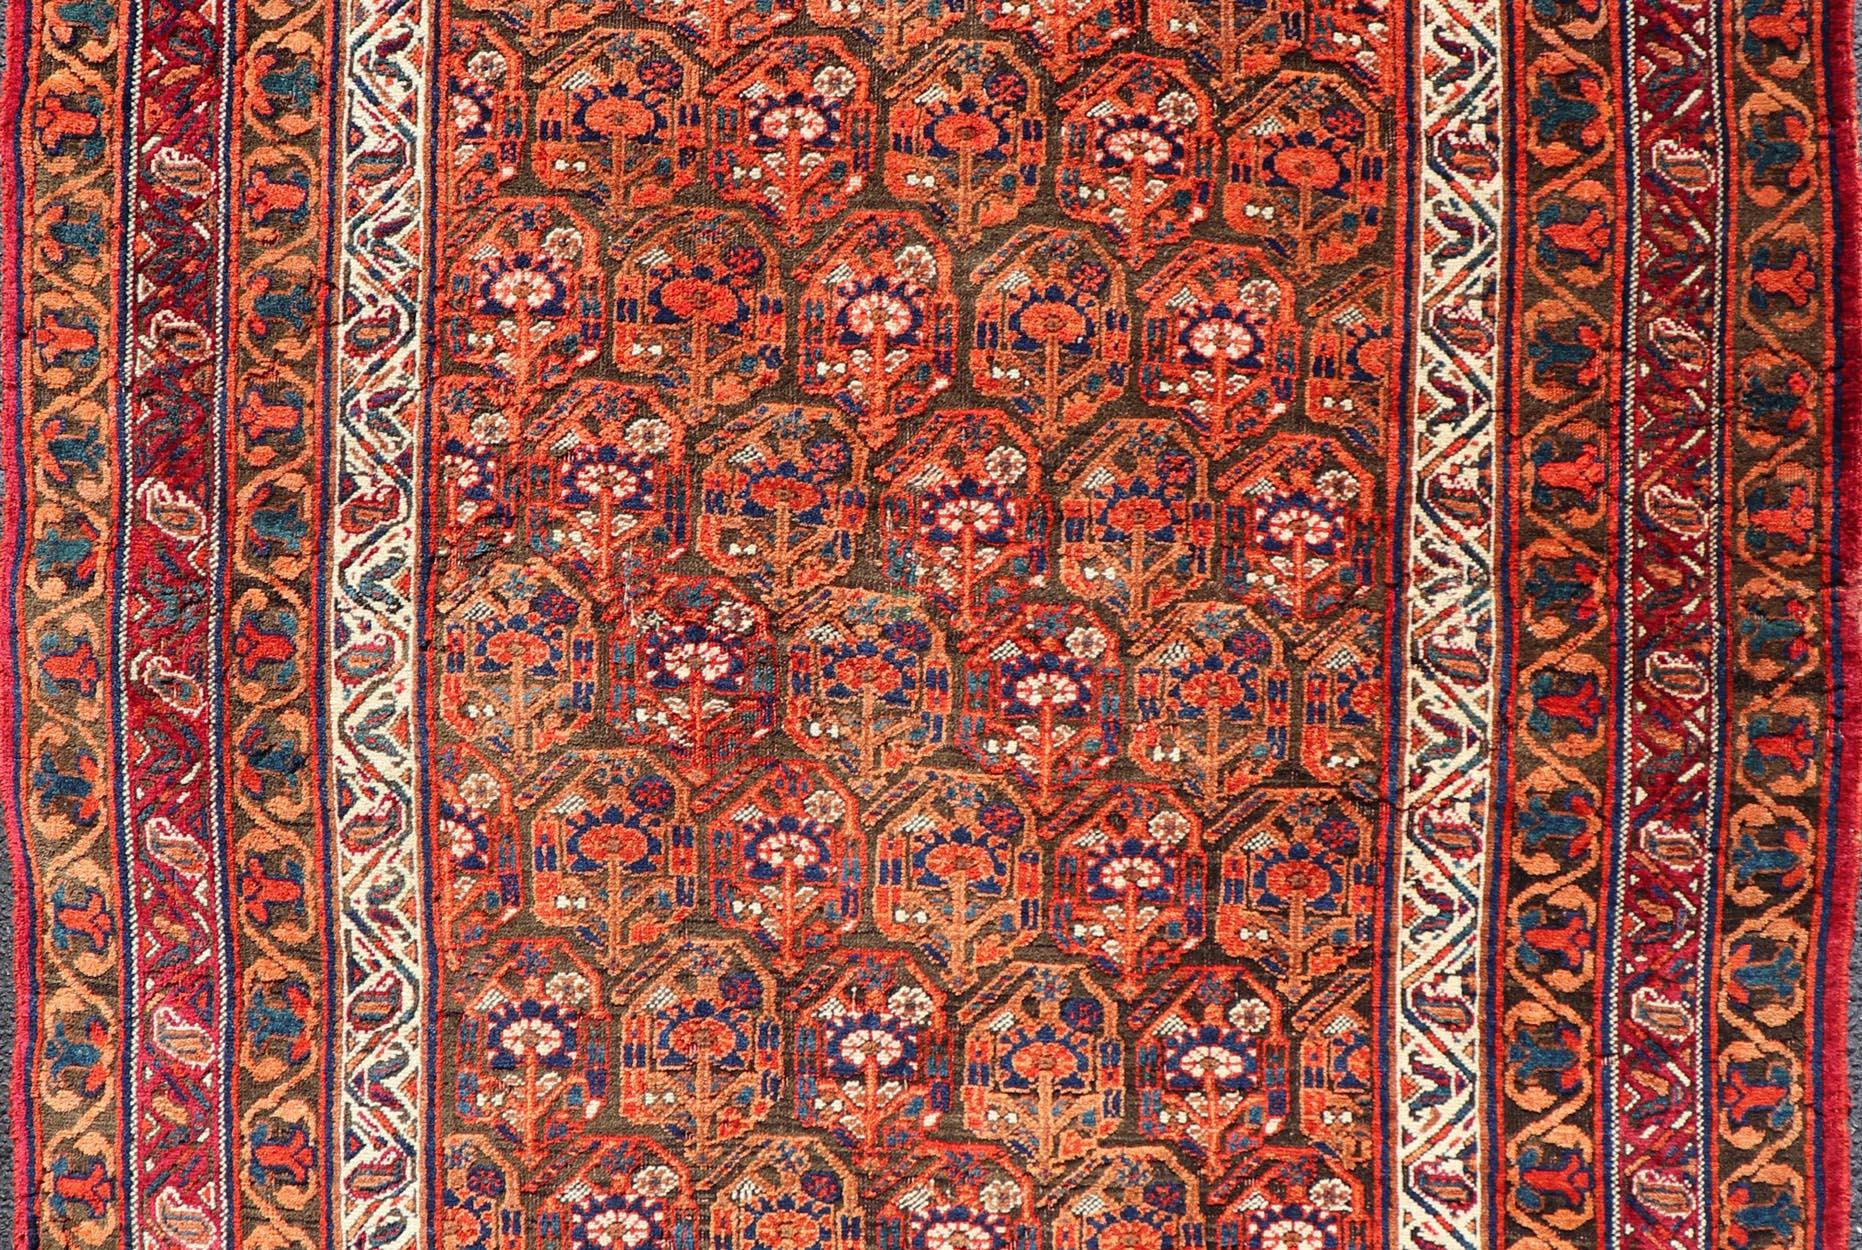  Fine Persian Antique Afshar Rug in Orange and Copper Background & Multi Colors For Sale 1